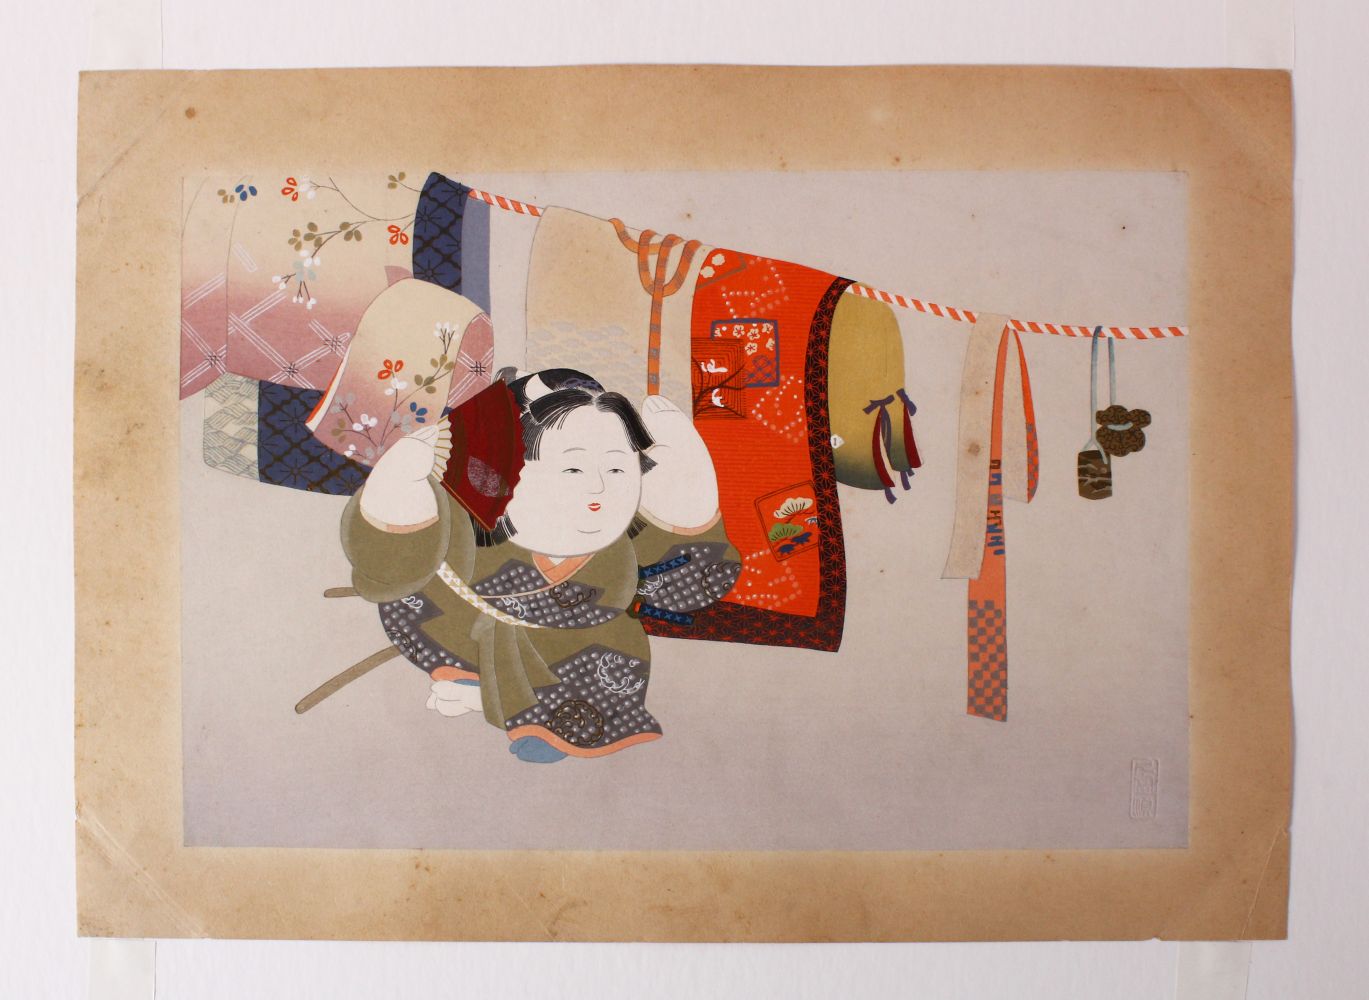 A EARLY 20TH CENTURY JAPANESE WOODBLOCK PRINT - JAPANESE FESTIVAL - a female figure holding a fan